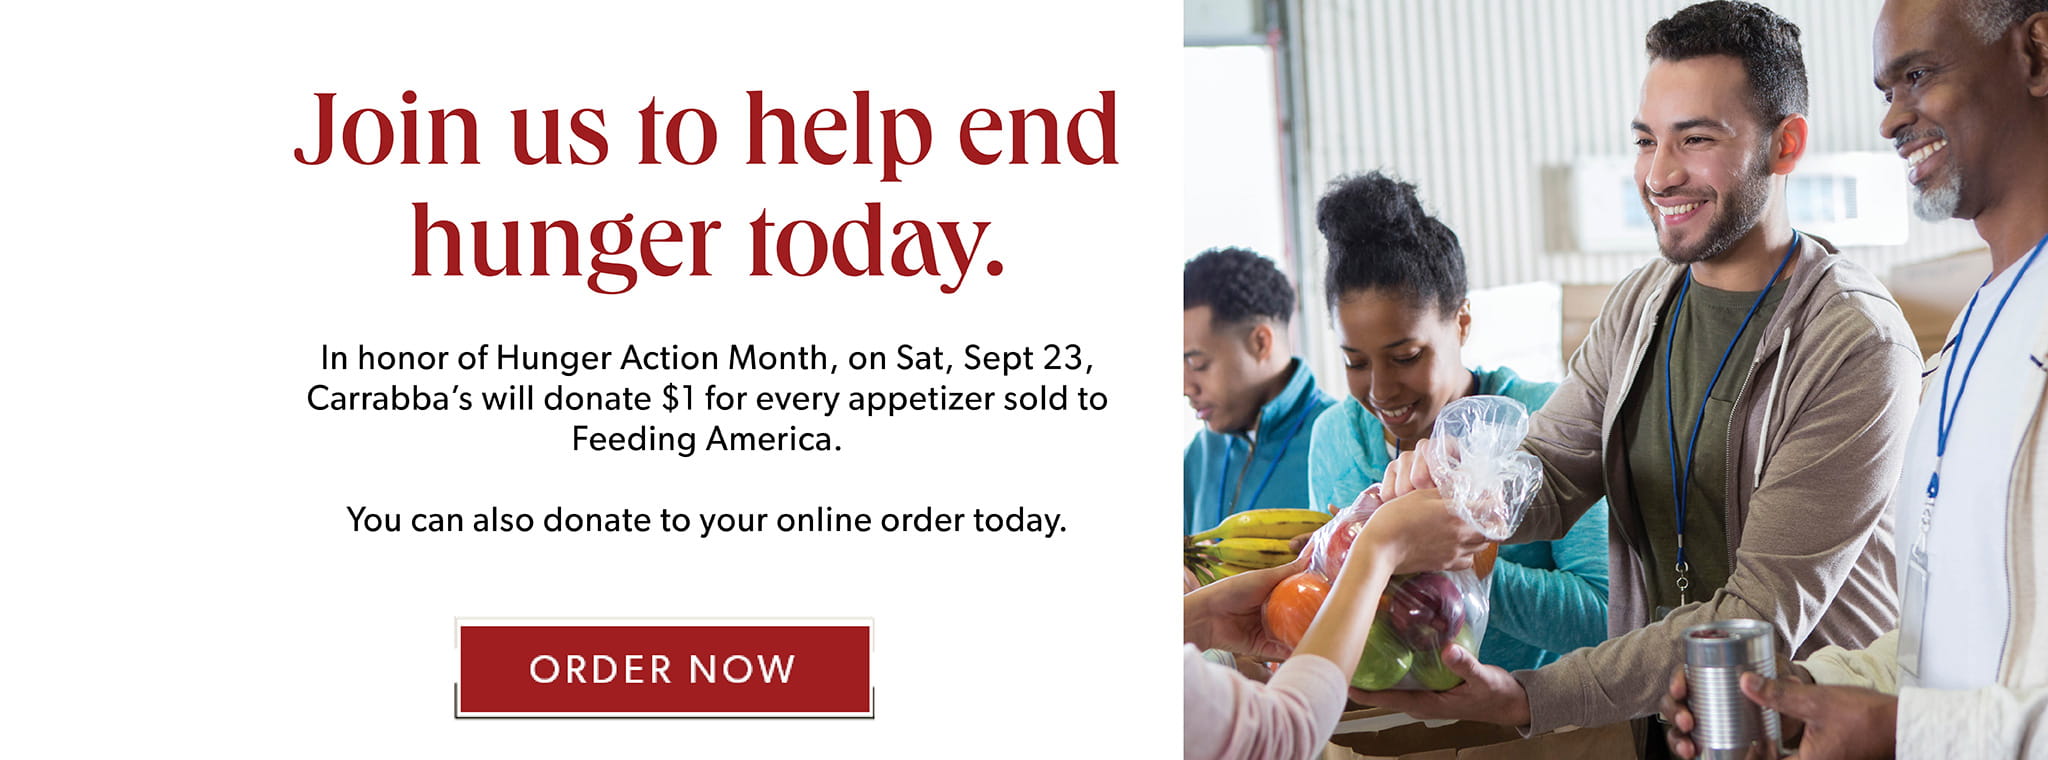 Join us to help end hunger today. In honor of Hunger Action Month, on Sat. Sept 23, Carrabba's will donate $1 for every appetizer sold to feeding America.